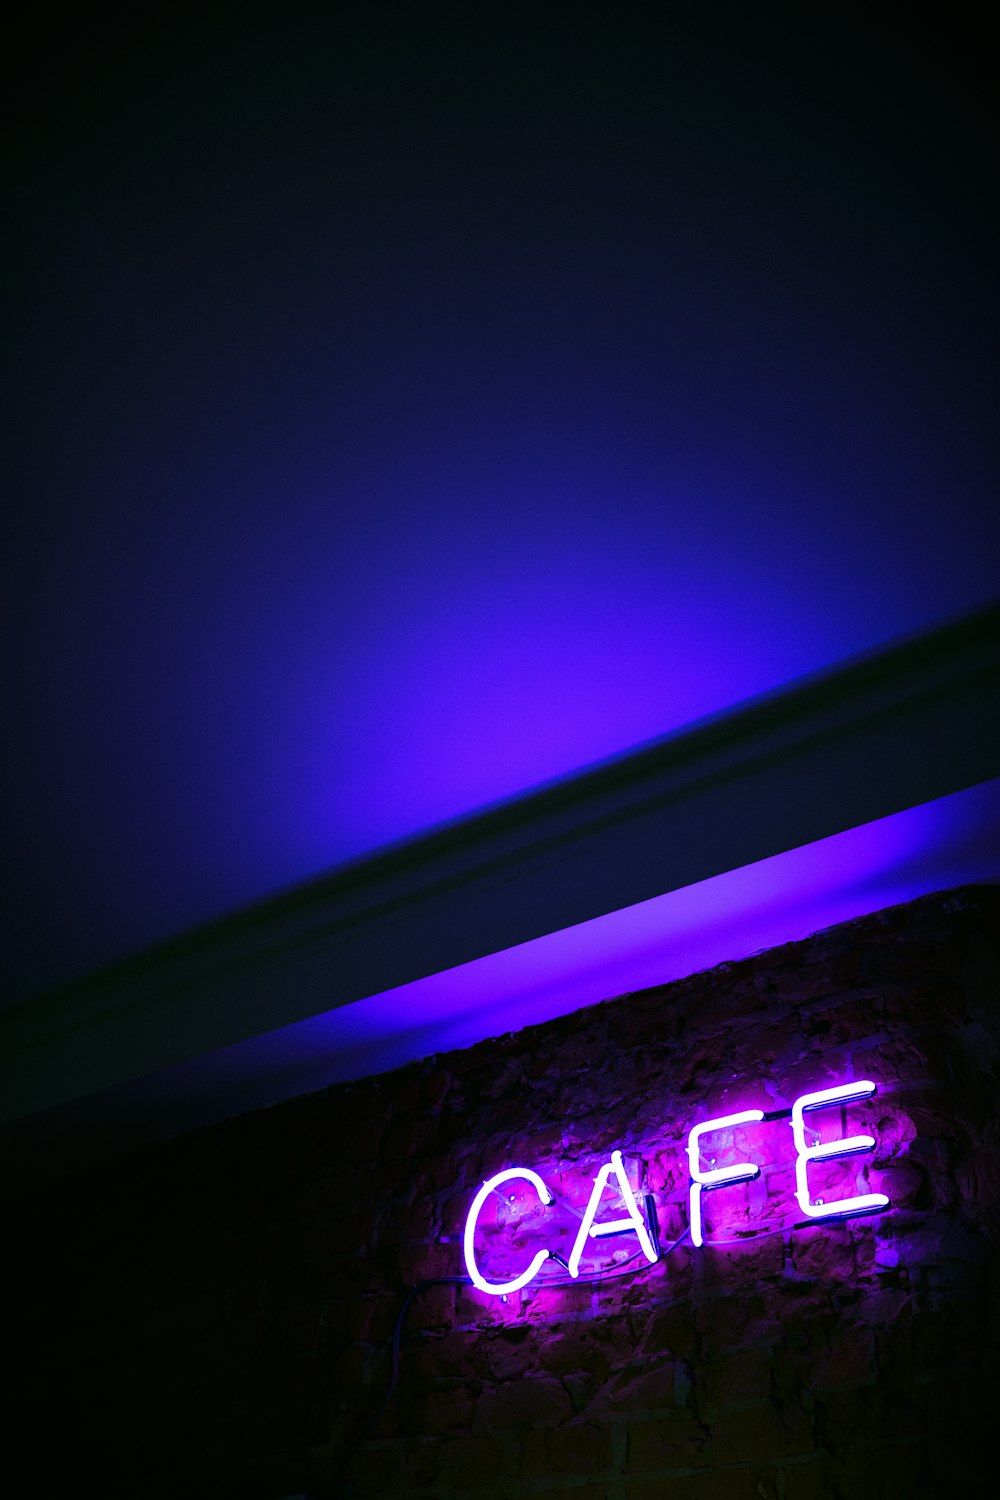 CAFE neon signage mounted on wall